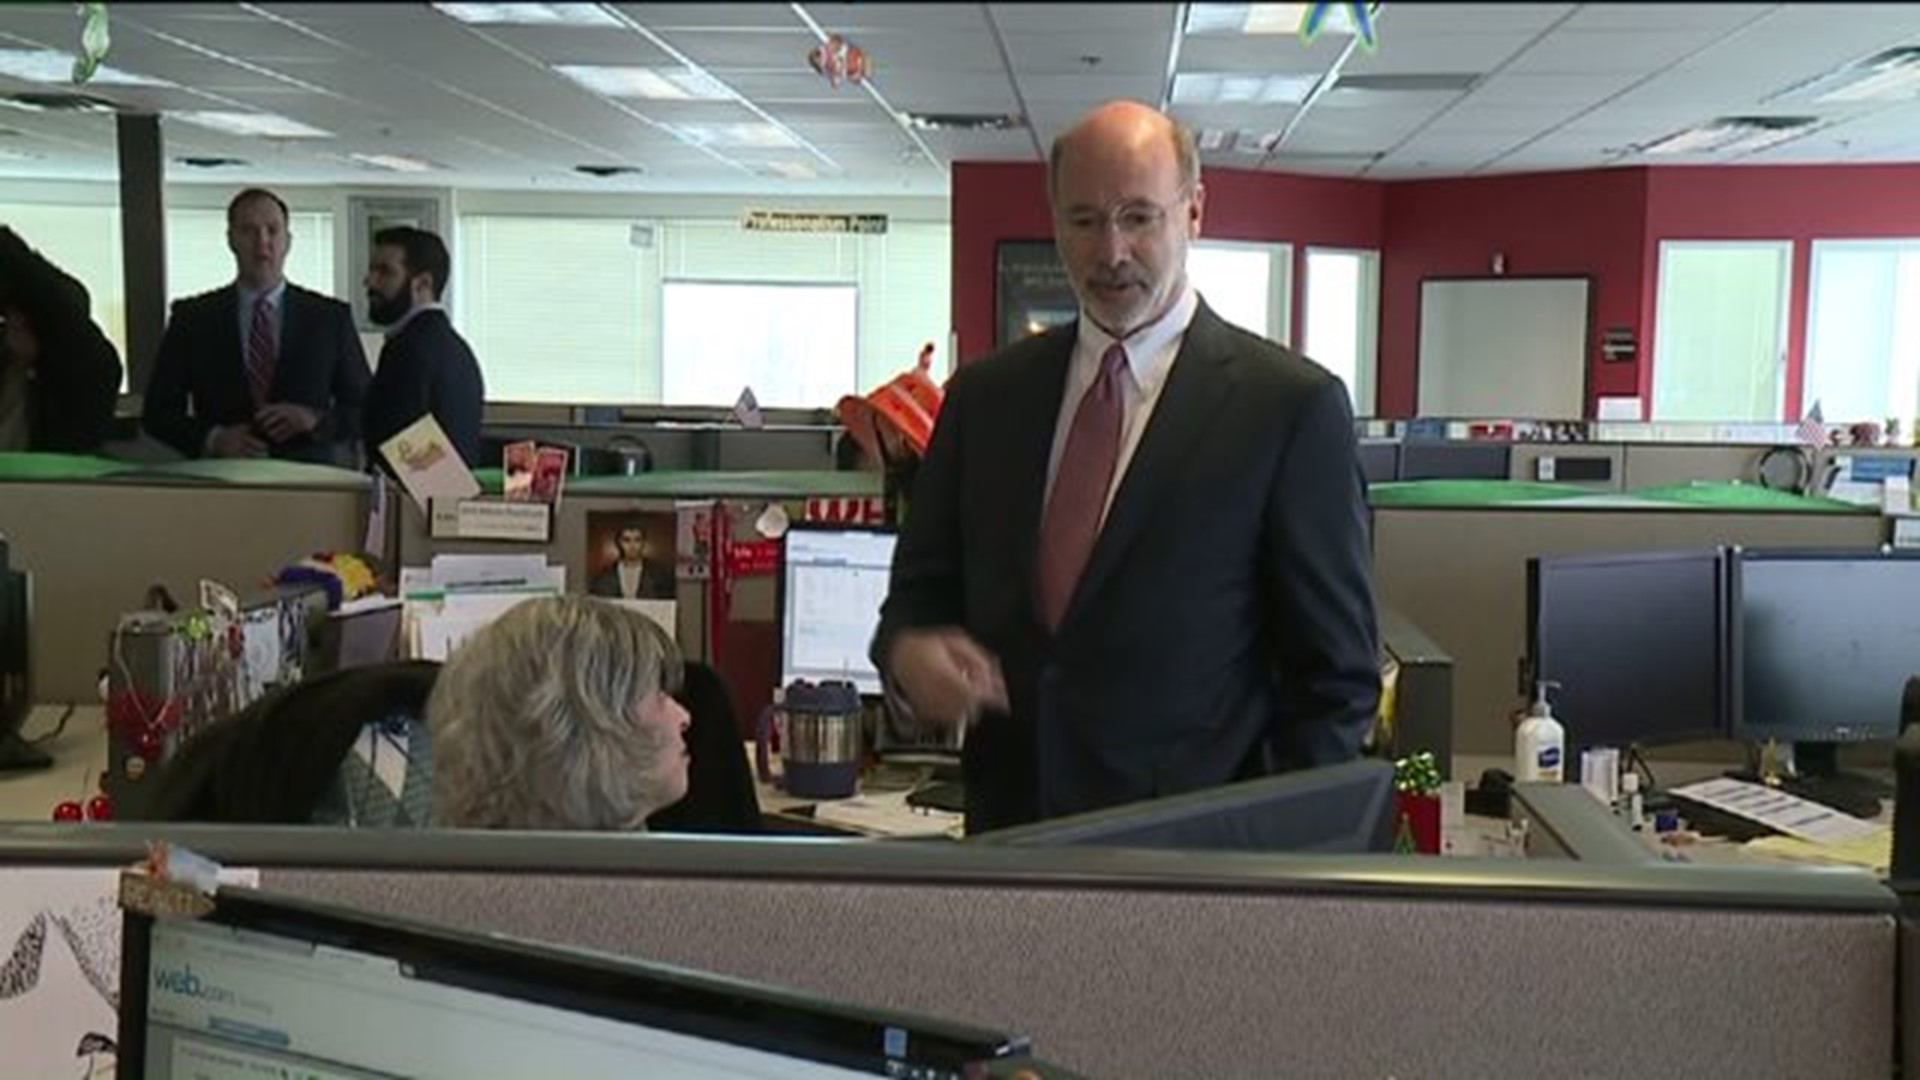 Governor Wolf Visits Tech Company in Luzerne County